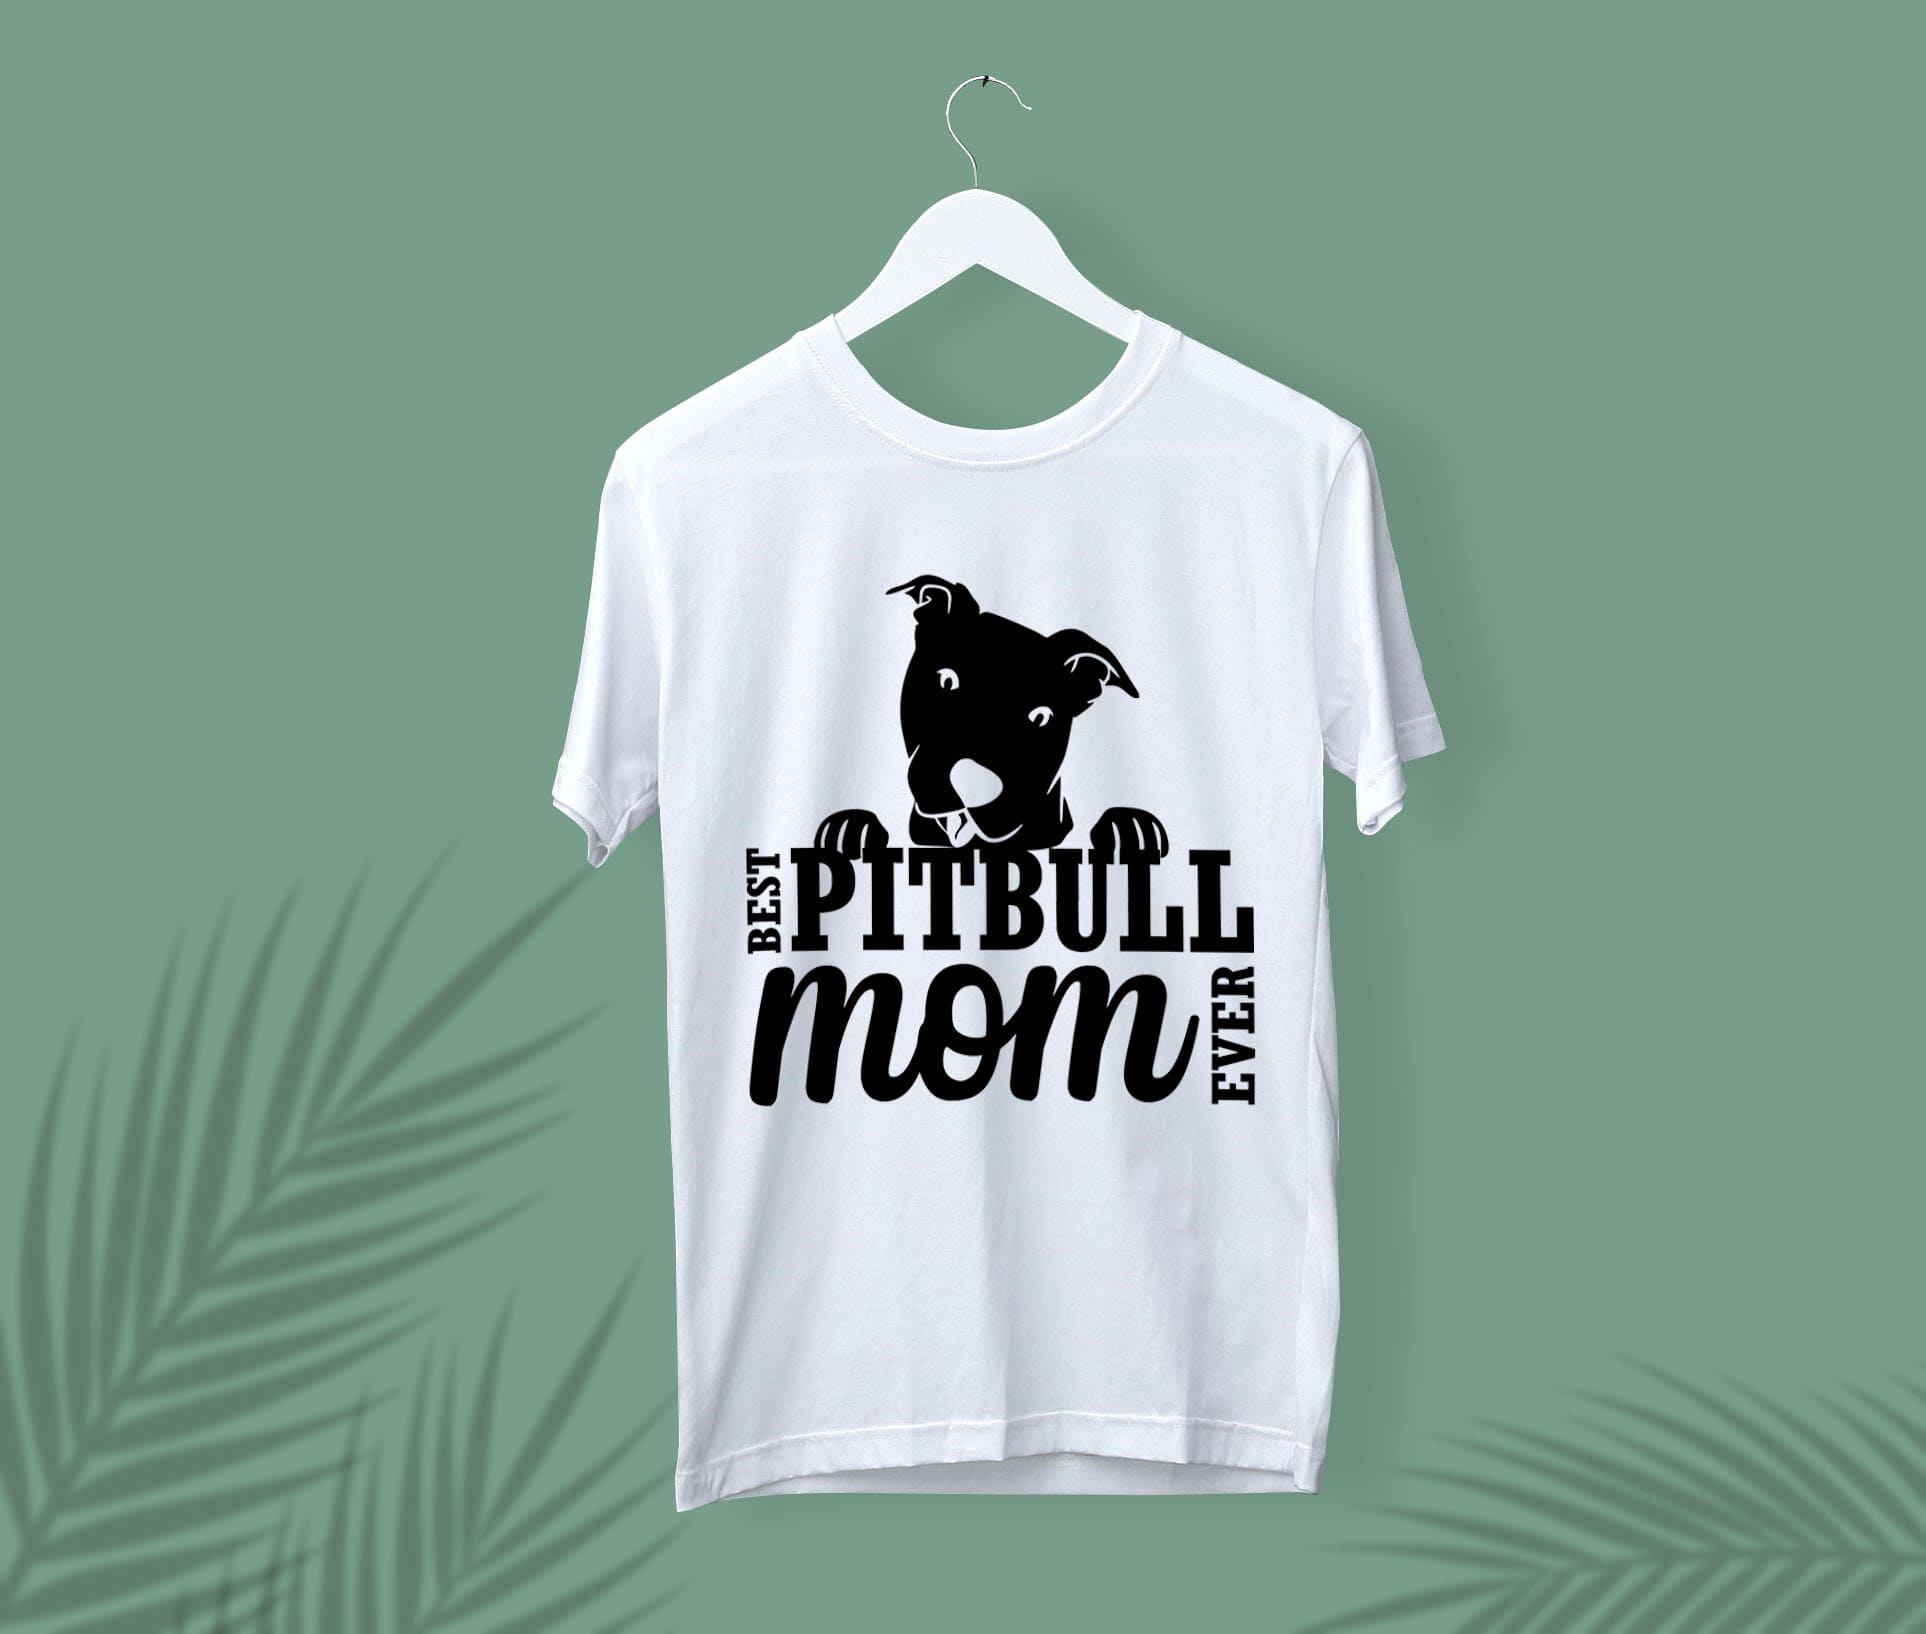 White t-shirt with a black pitbull mom face on a white hanger, on a green background.